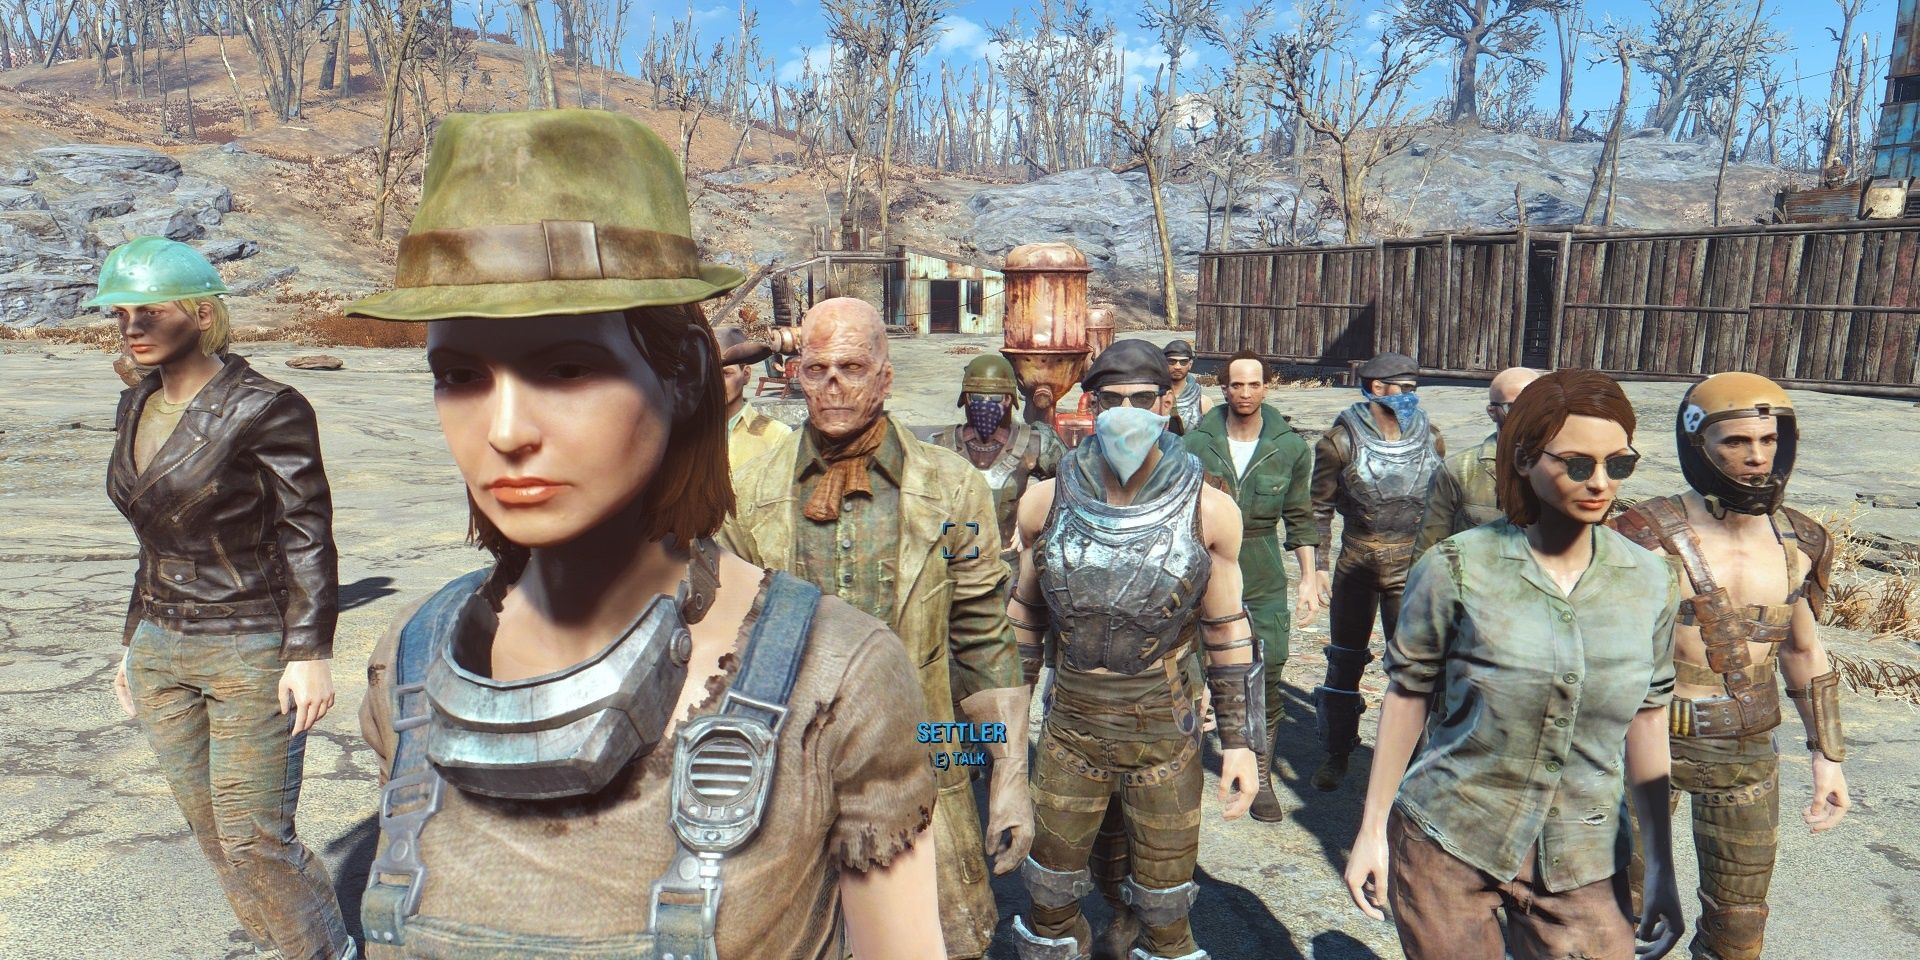 Settlers in Fallout 4